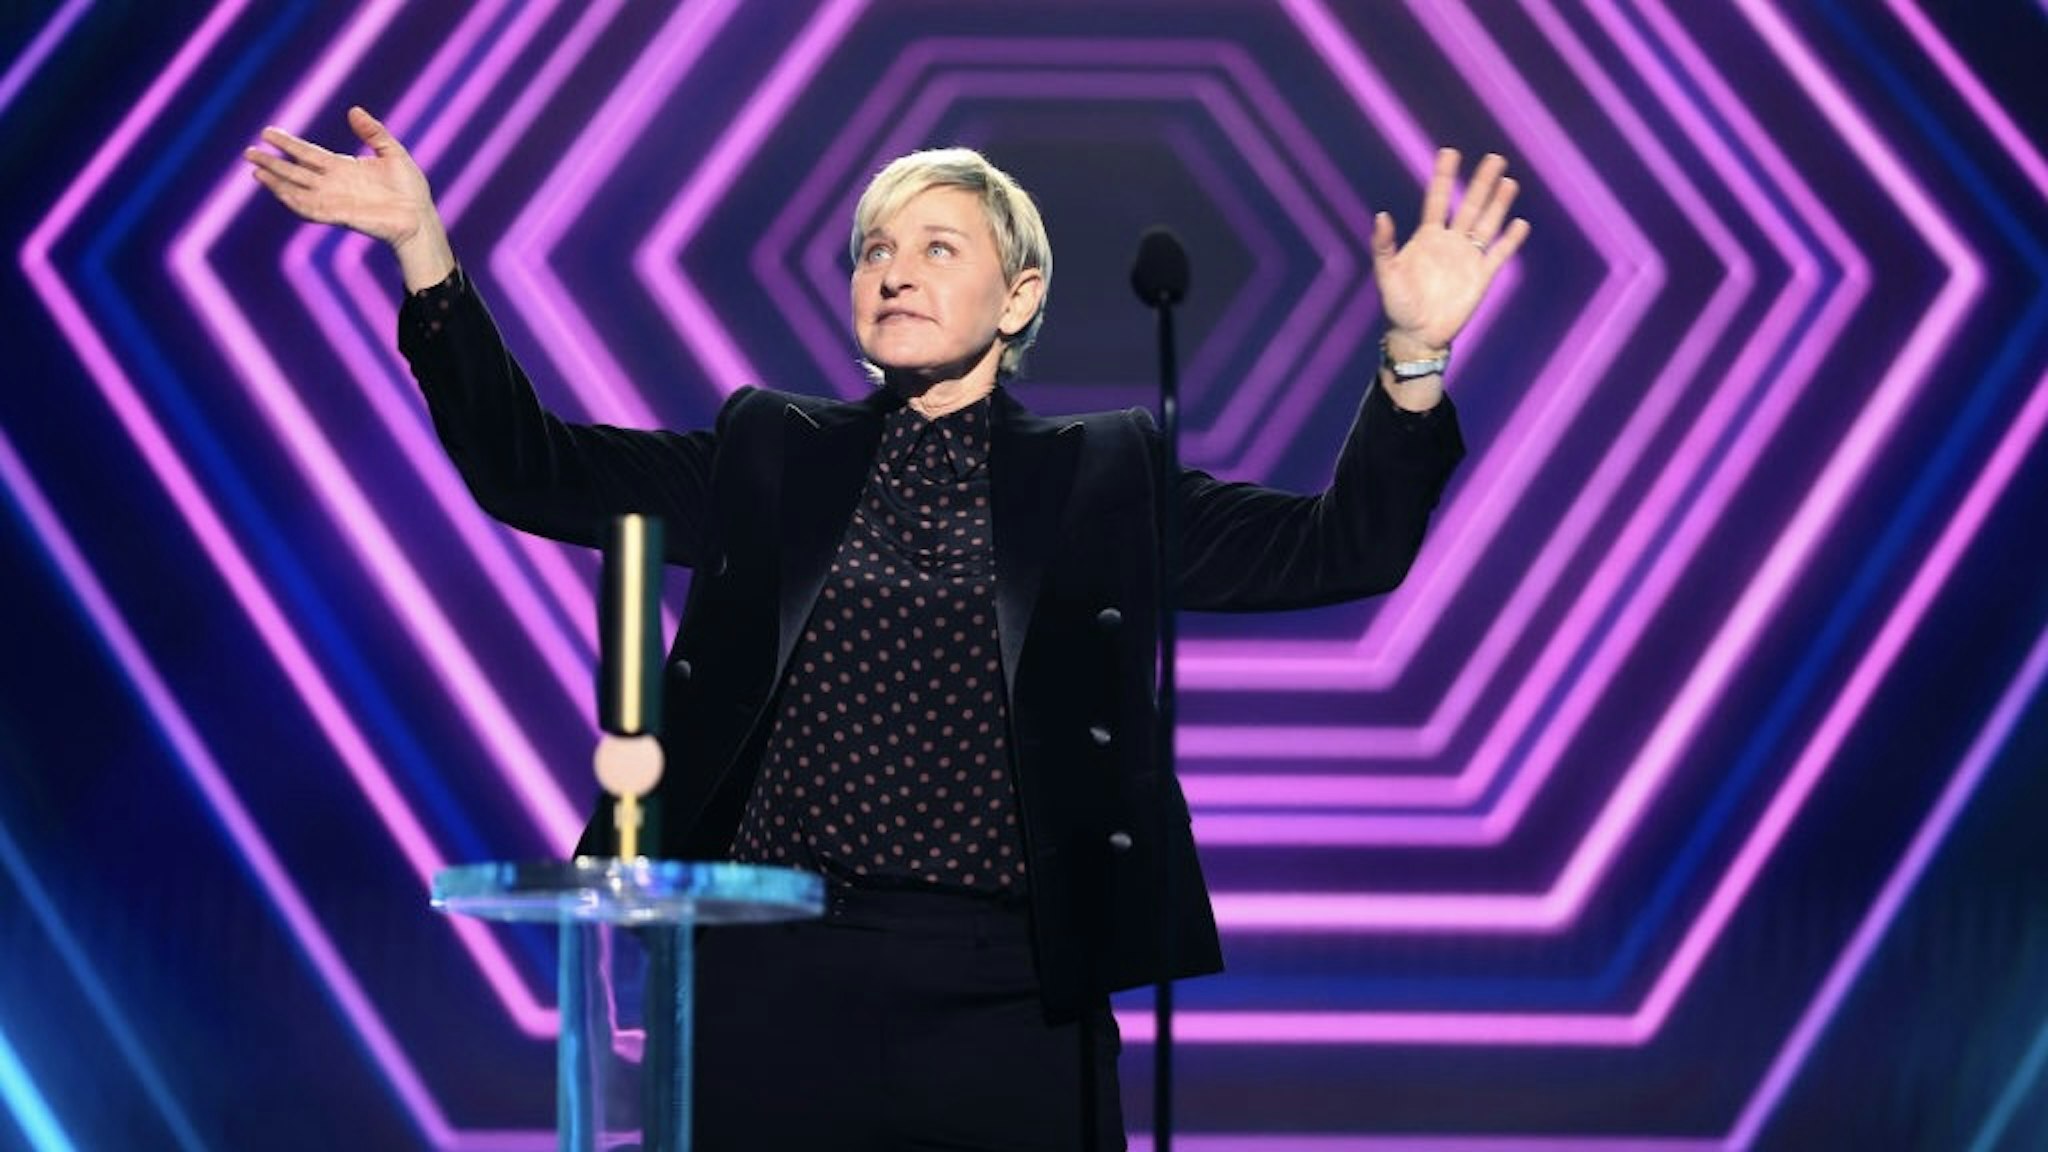 SANTA MONICA, CALIFORNIA - NOVEMBER 15: 2020 E! PEOPLE'S CHOICE AWARDS -- In this image released on November 15, Ellen DeGeneres accepts the award for The Daytime Talk Show of 2020 onstage for the 2020 E! People's Choice Awards held at the Barker Hangar in Santa Monica, California and on broadcast on Sunday, November 15, 2020. (Photo by Christopher Polk/E! Entertainment/NBCU Photo Bank via Getty Images)